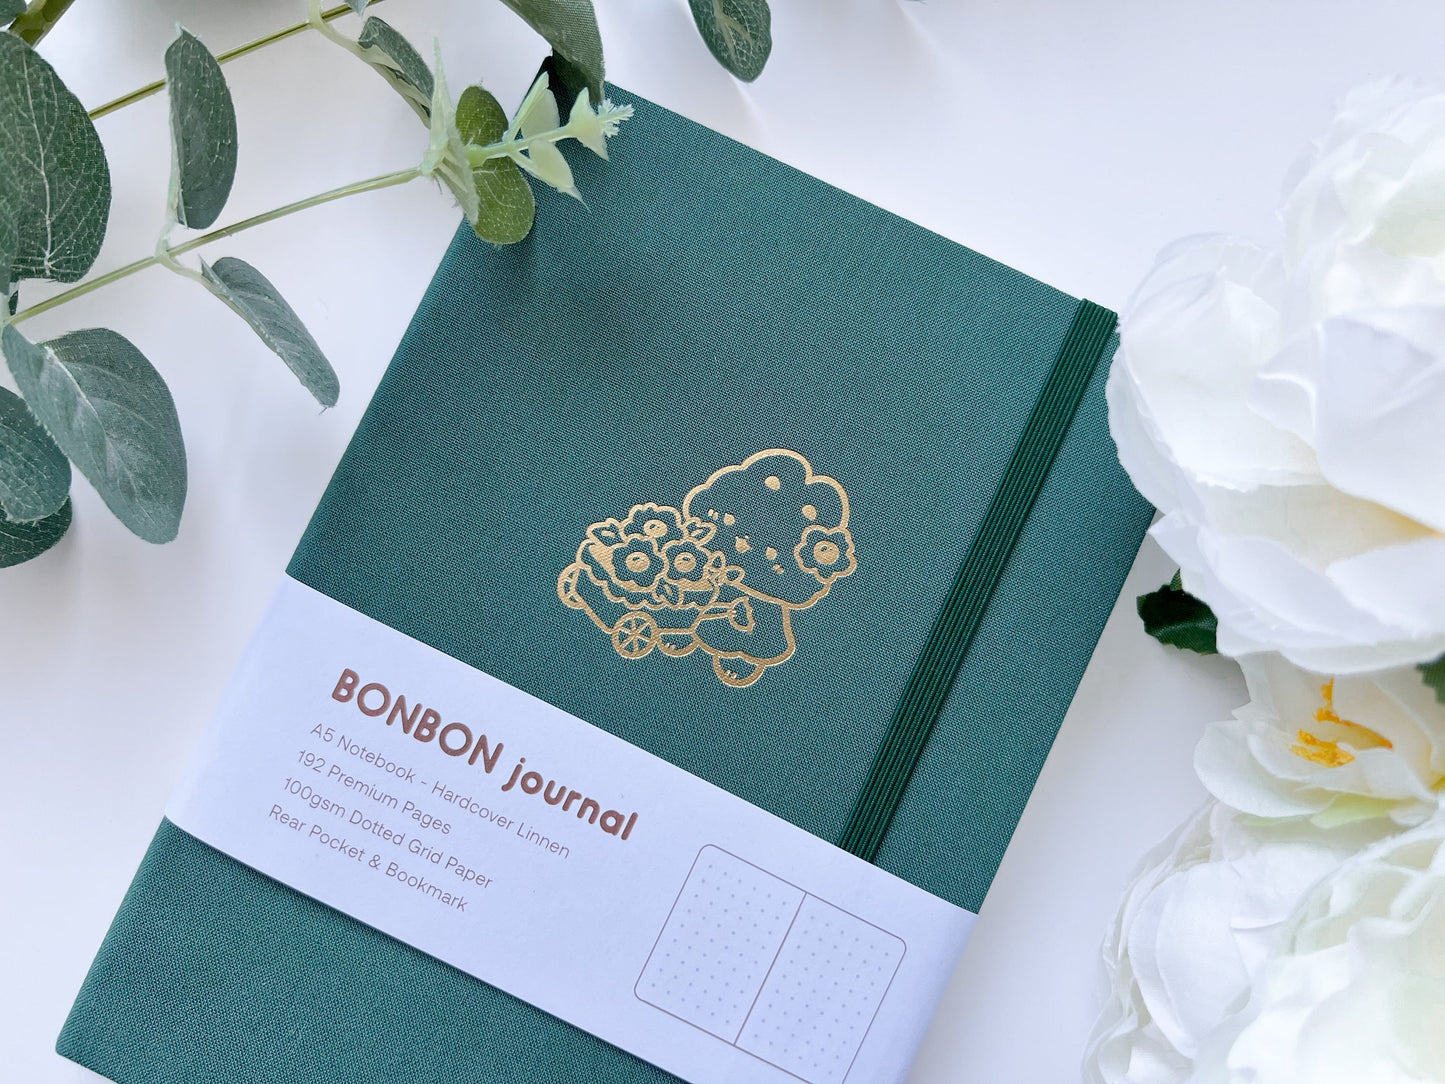 Forest Green Bullet Journal Notebook with Dotted Pages - Bunny Bonbon Design in Gold Foil Holding Flower Cart